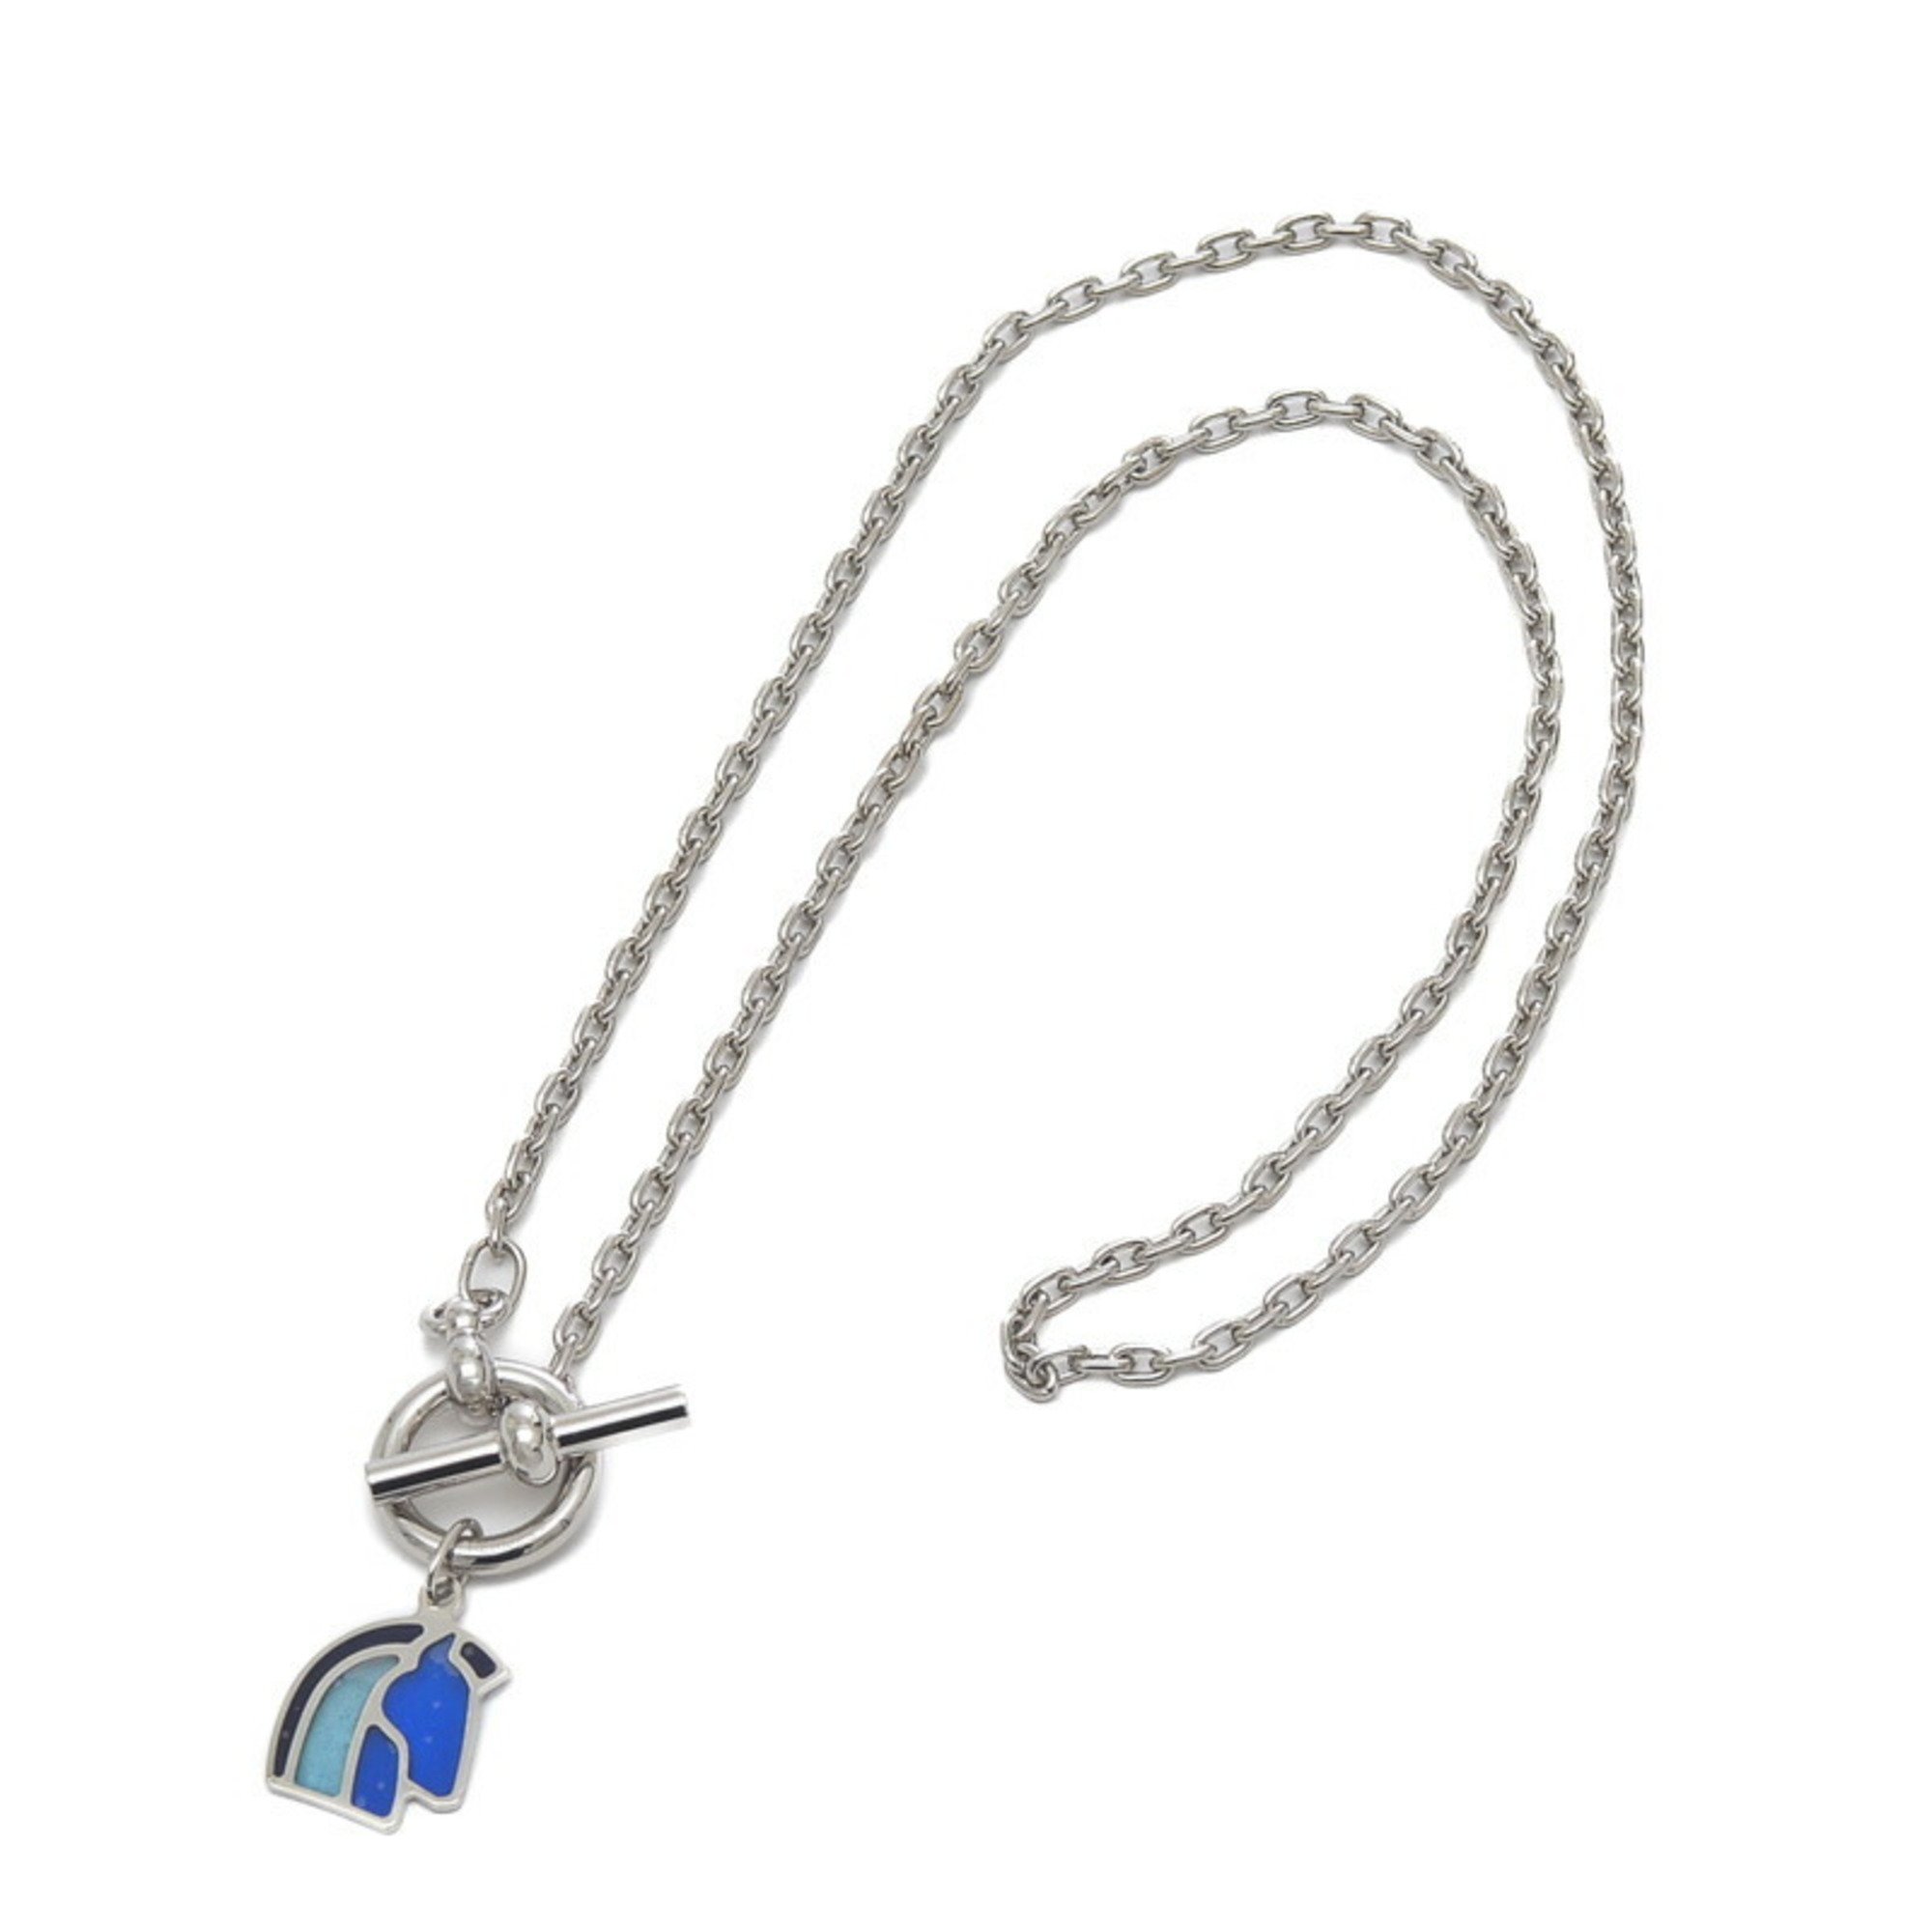 Hermes Helios Cheval Horse Chain Necklace Silver Camaille Blue